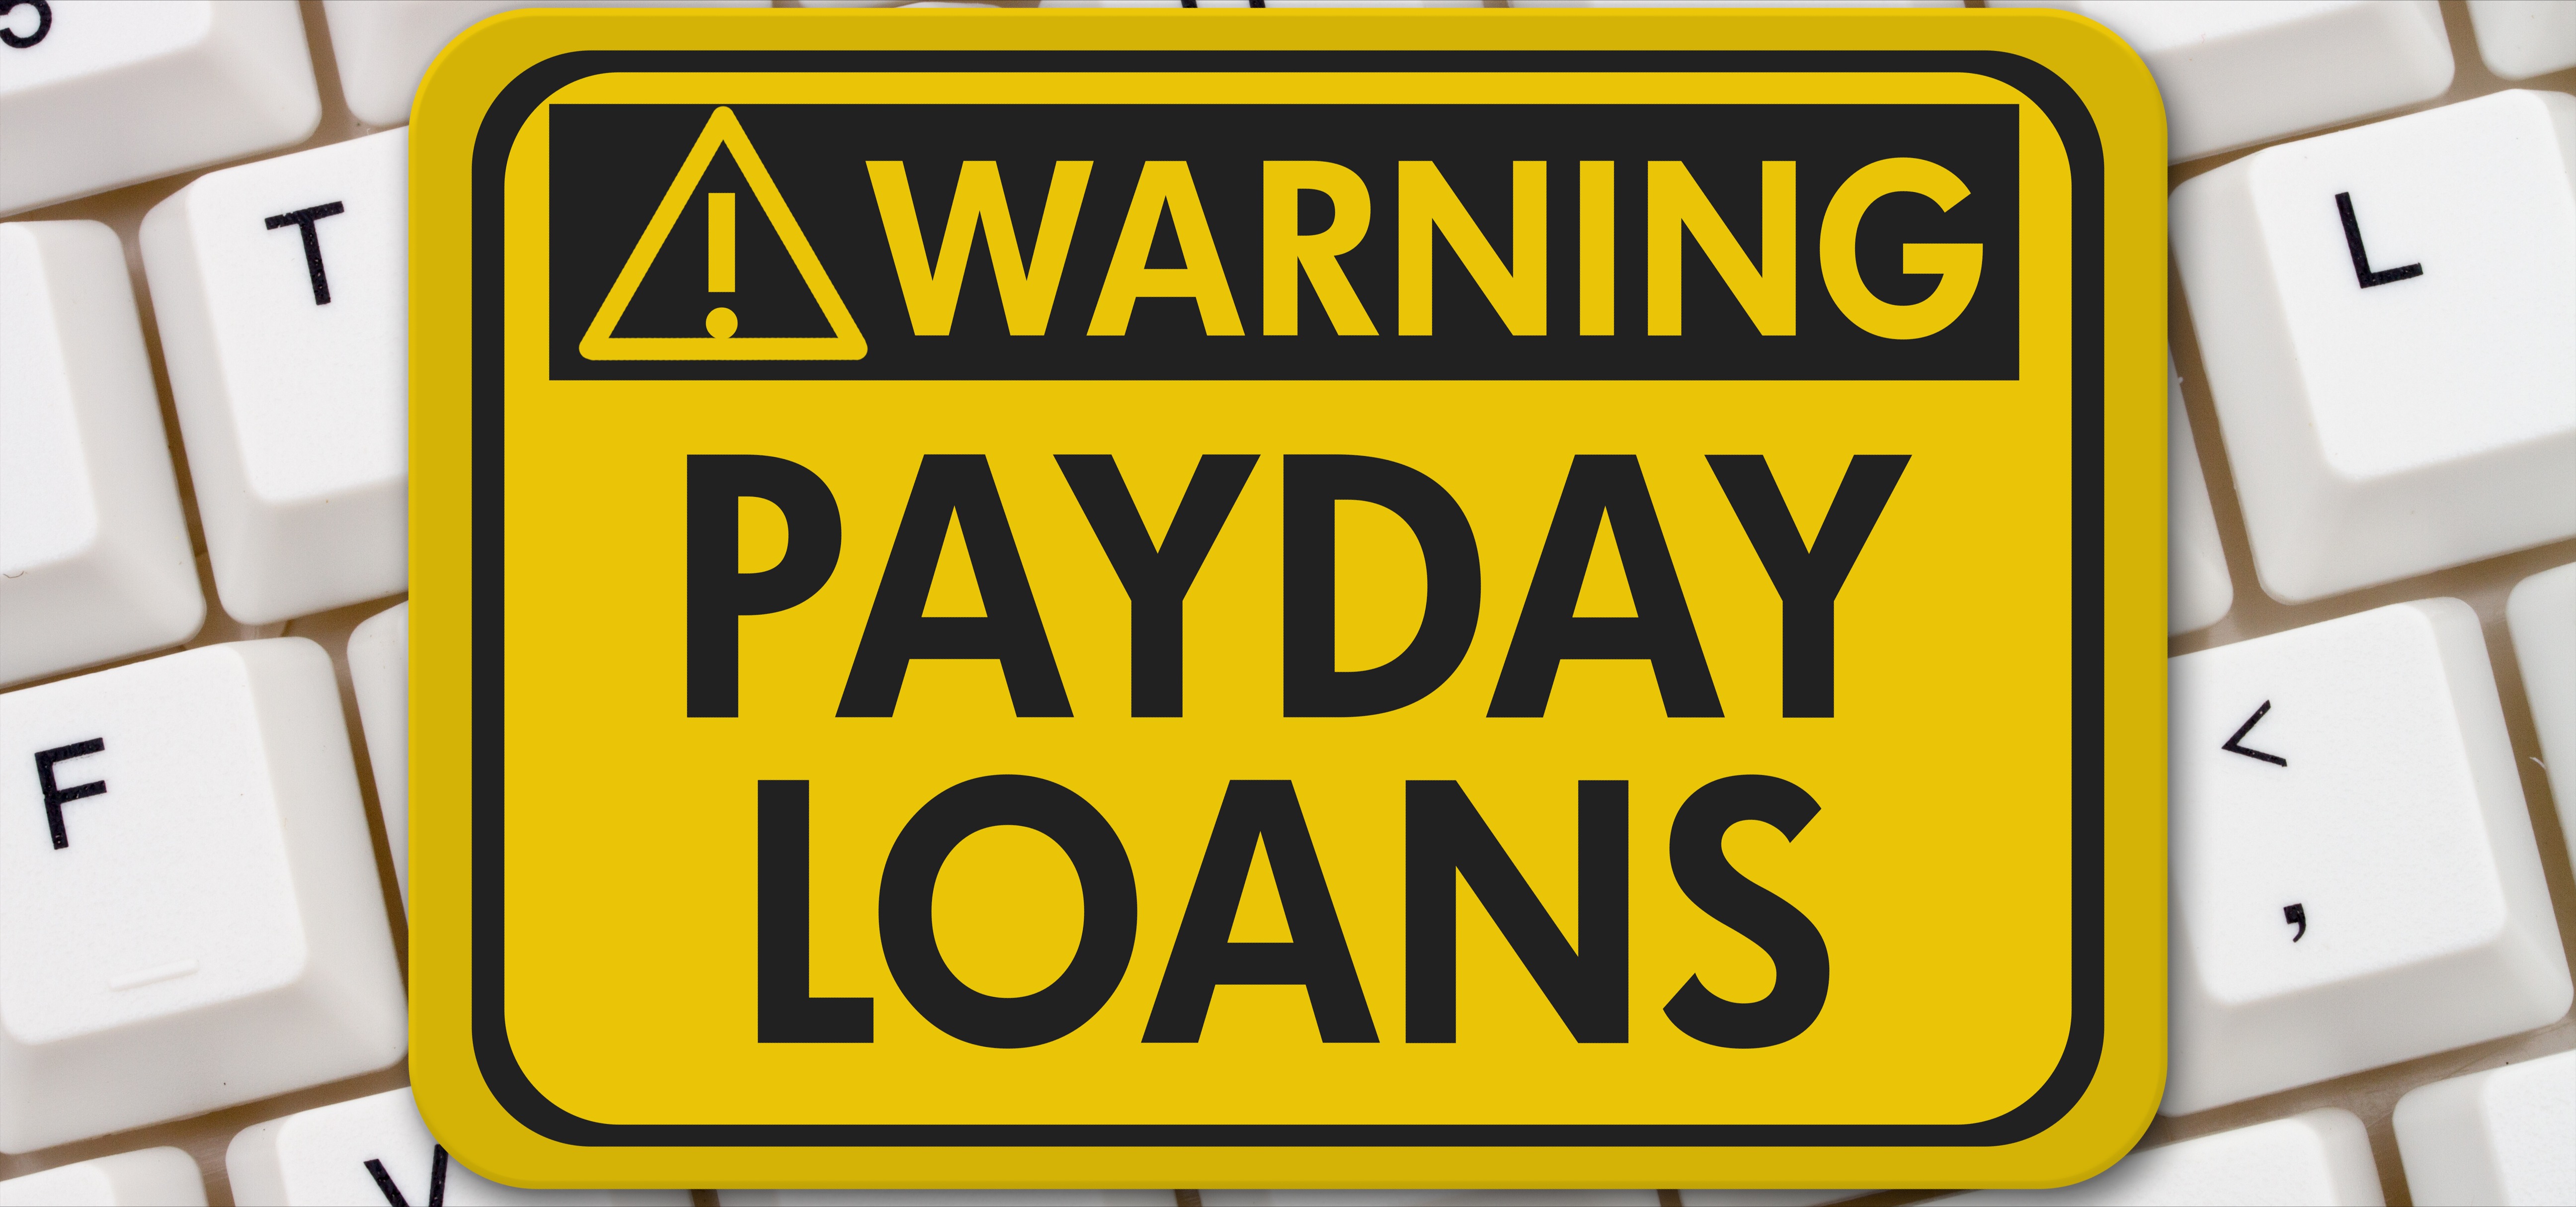 A yellow warning sign with text Payday Loans